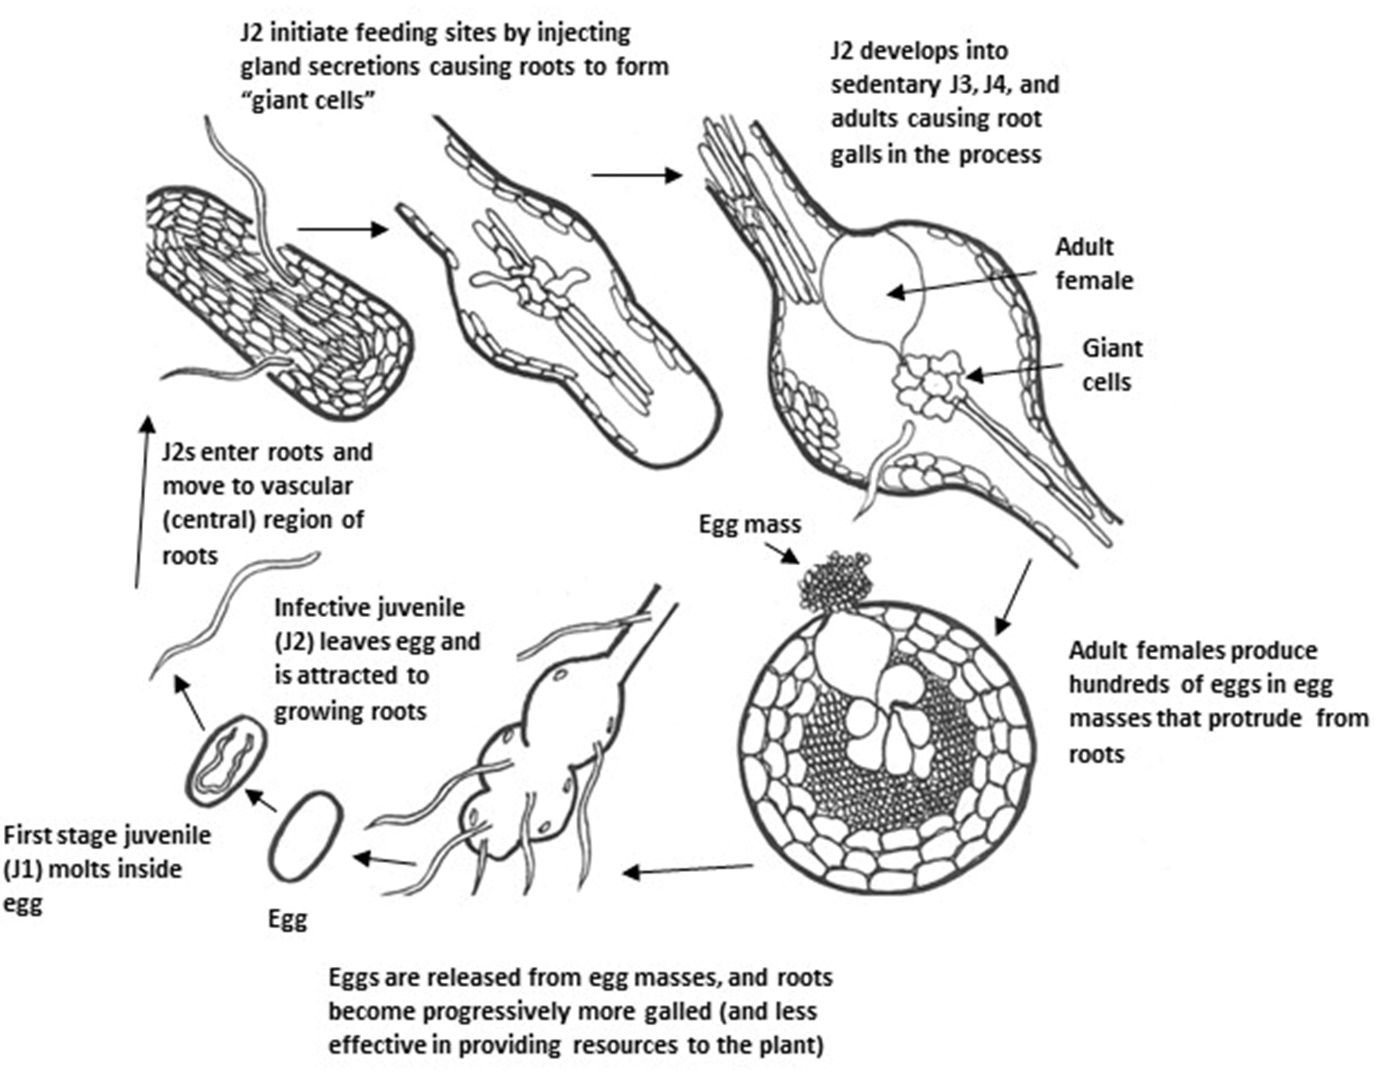 Generalized life cycle of the root-knot nematode Meloidogyne spp.